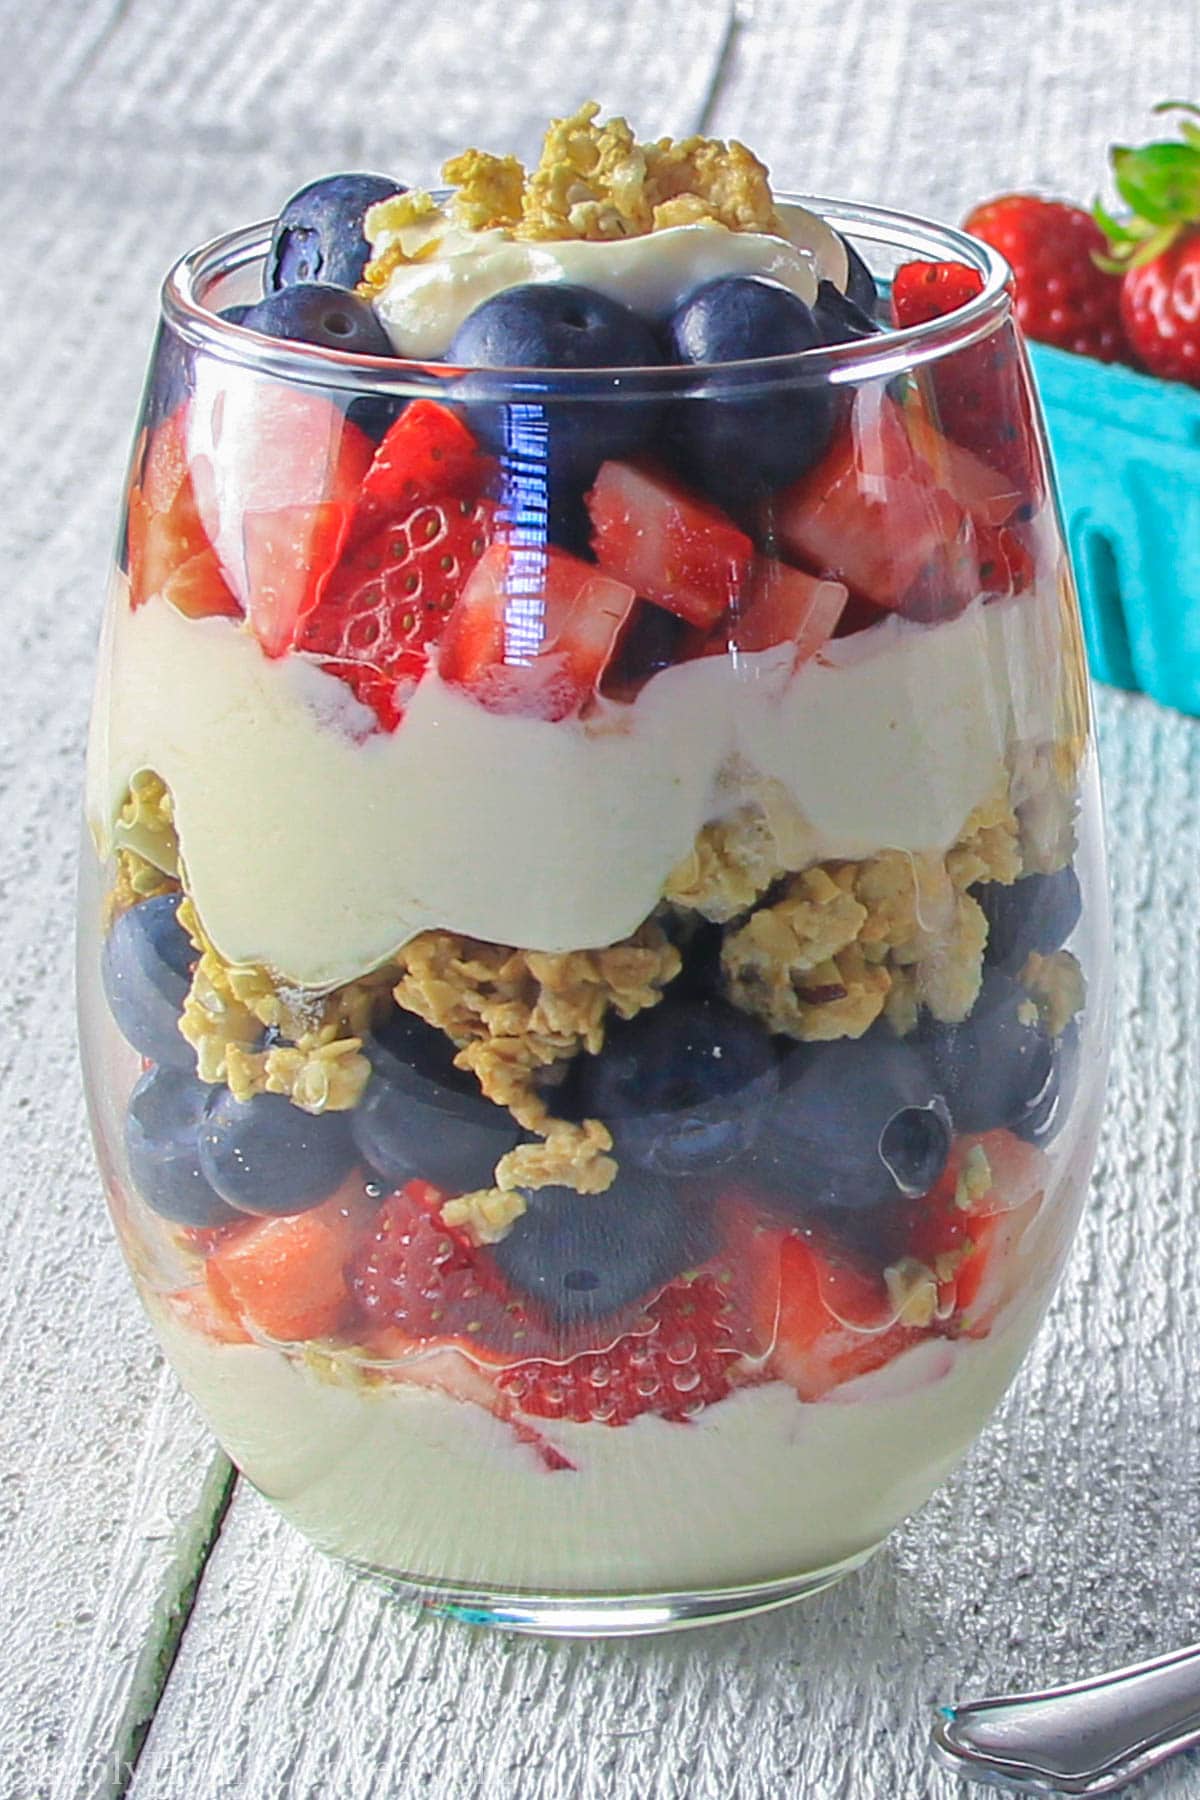 Vertical image of a Yogurt Parfait in a glass, with strawberries in the background.